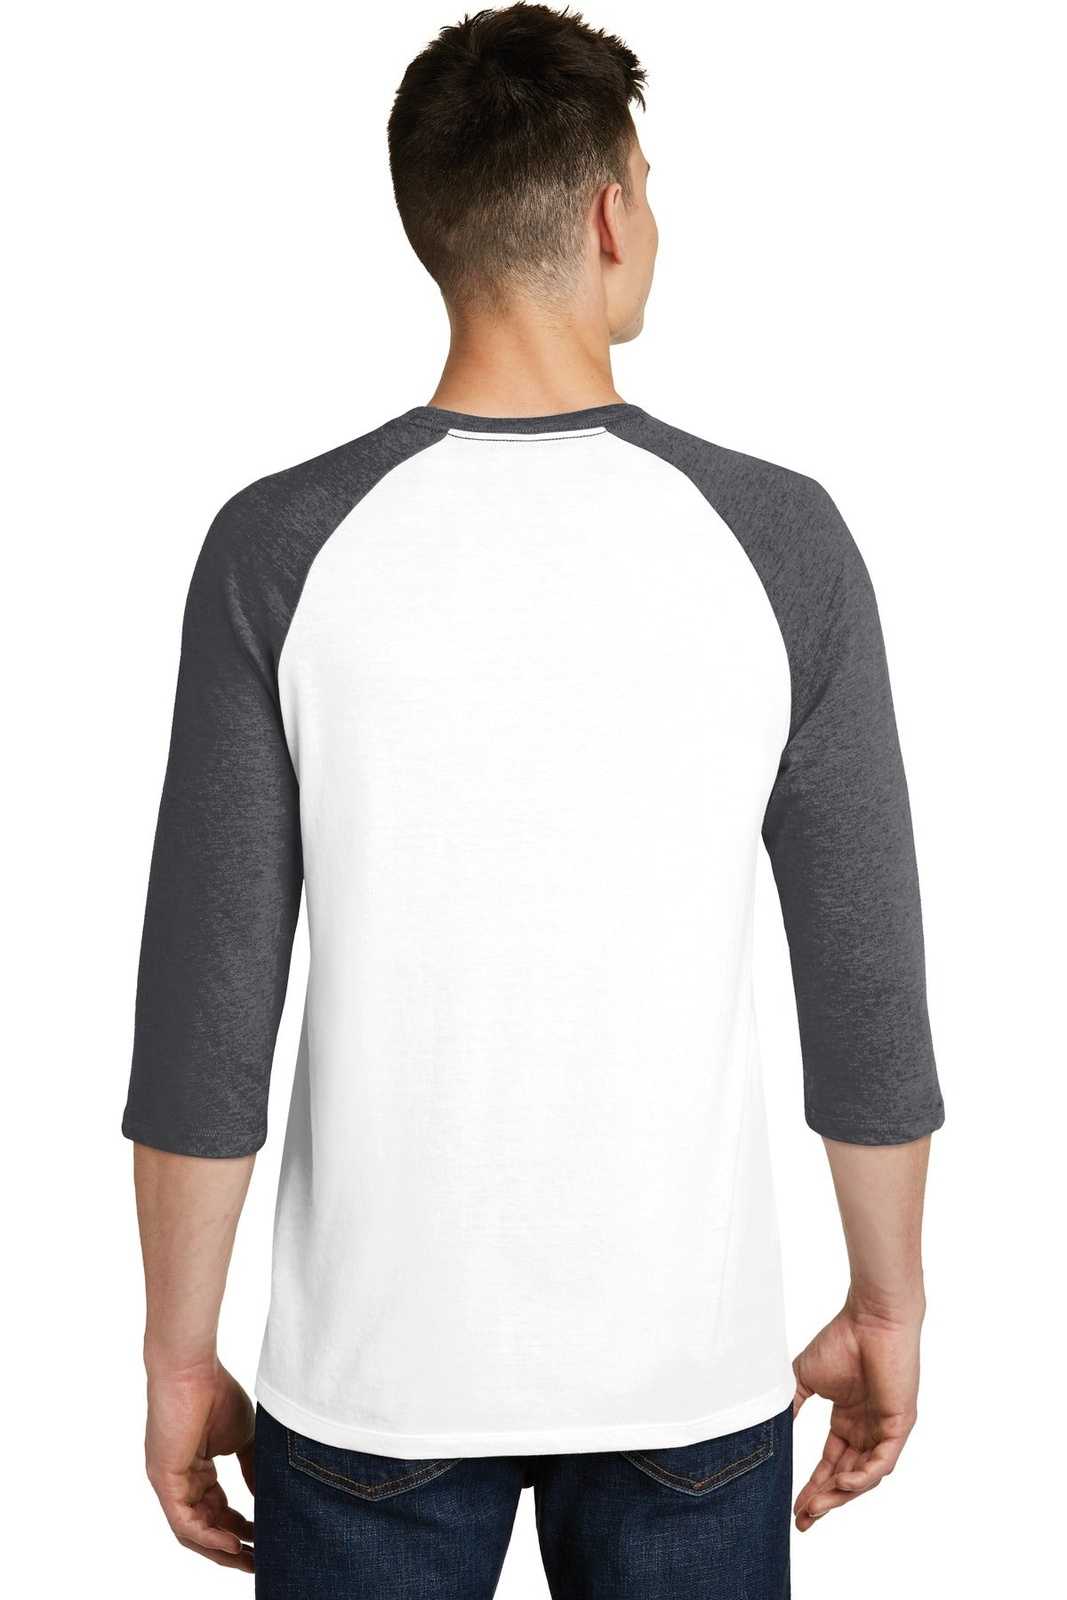 District DT6210 Very Important Tee 3/4-Sleeve Raglan - Heathered Charcoal White - HIT a Double - 2